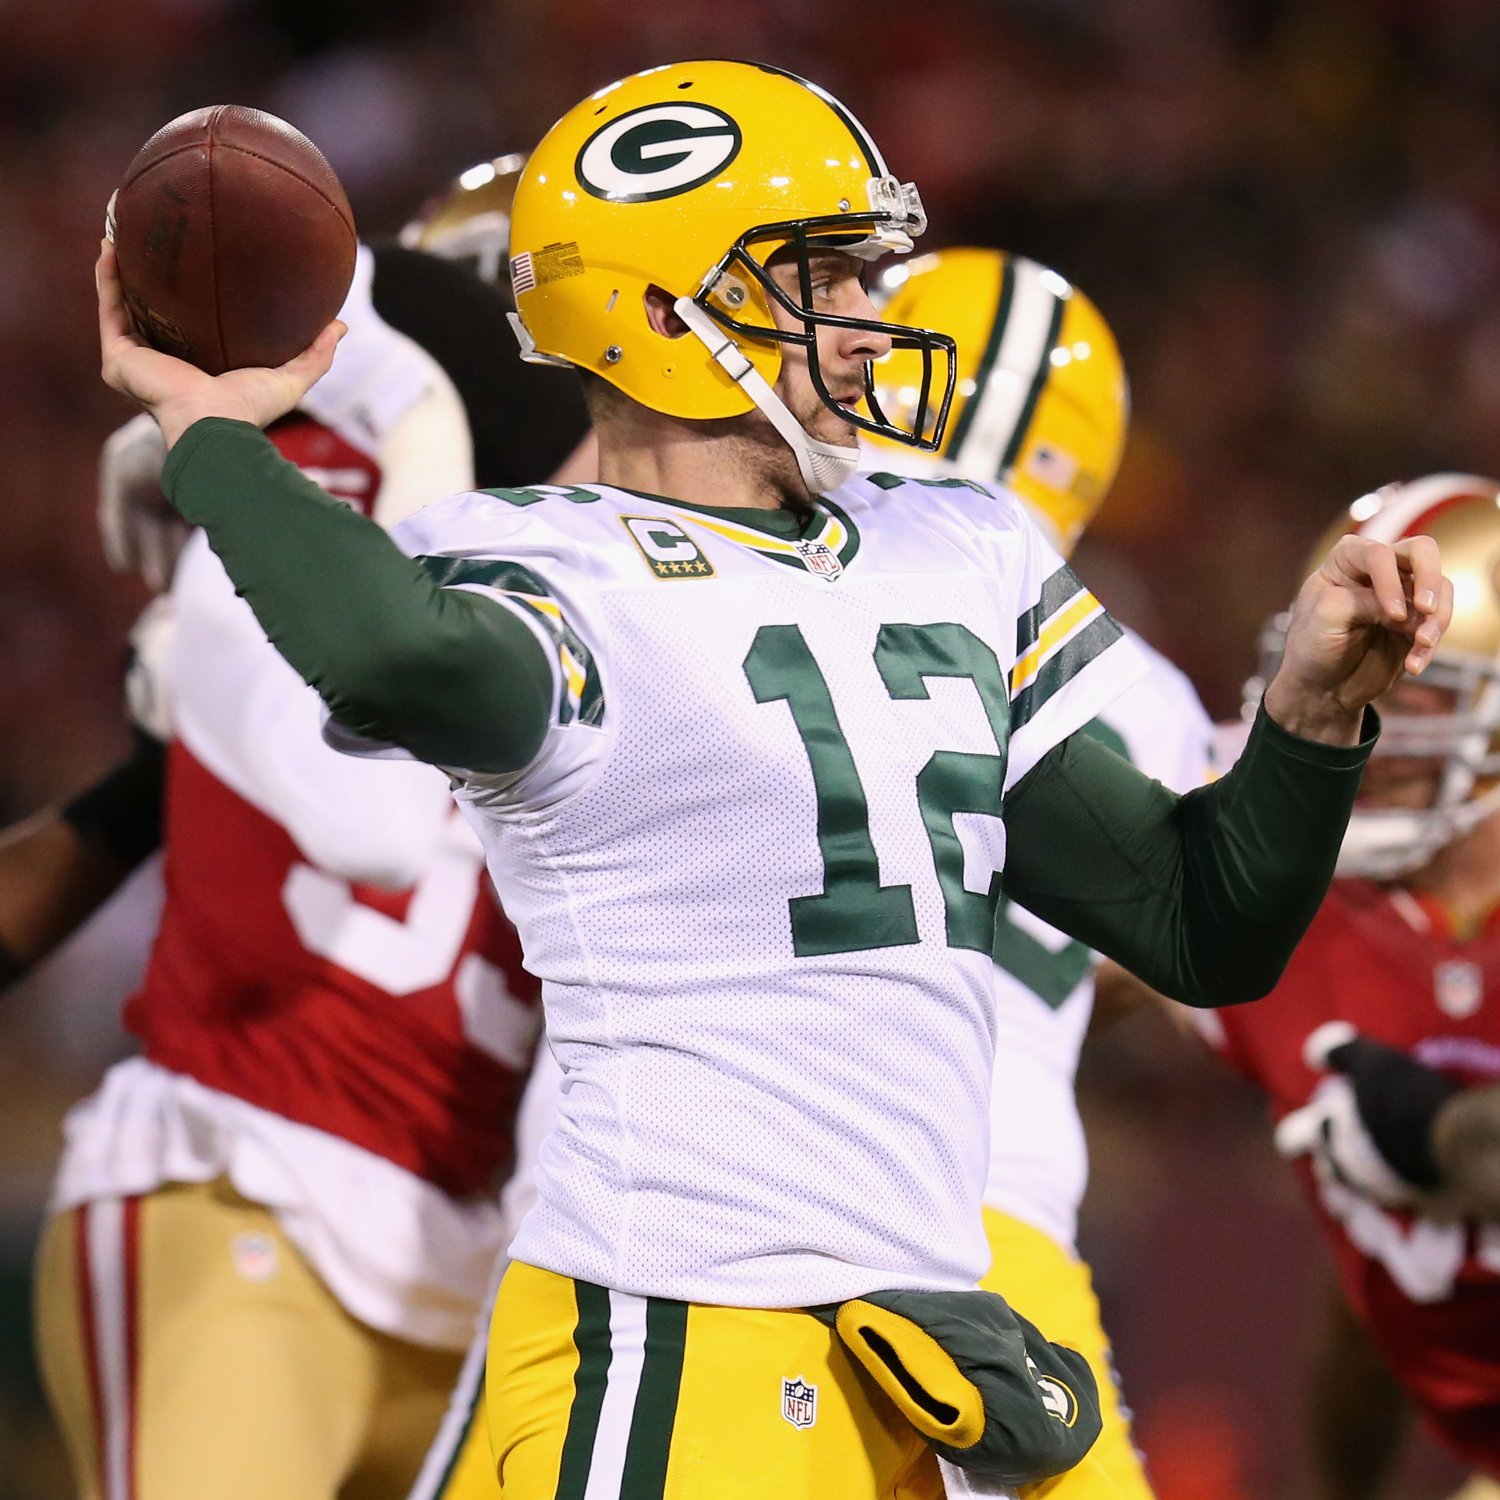 Packers vs. 49ers: Aaron Rodgers Is the Key to a Green Bay Win | Bleacher Report